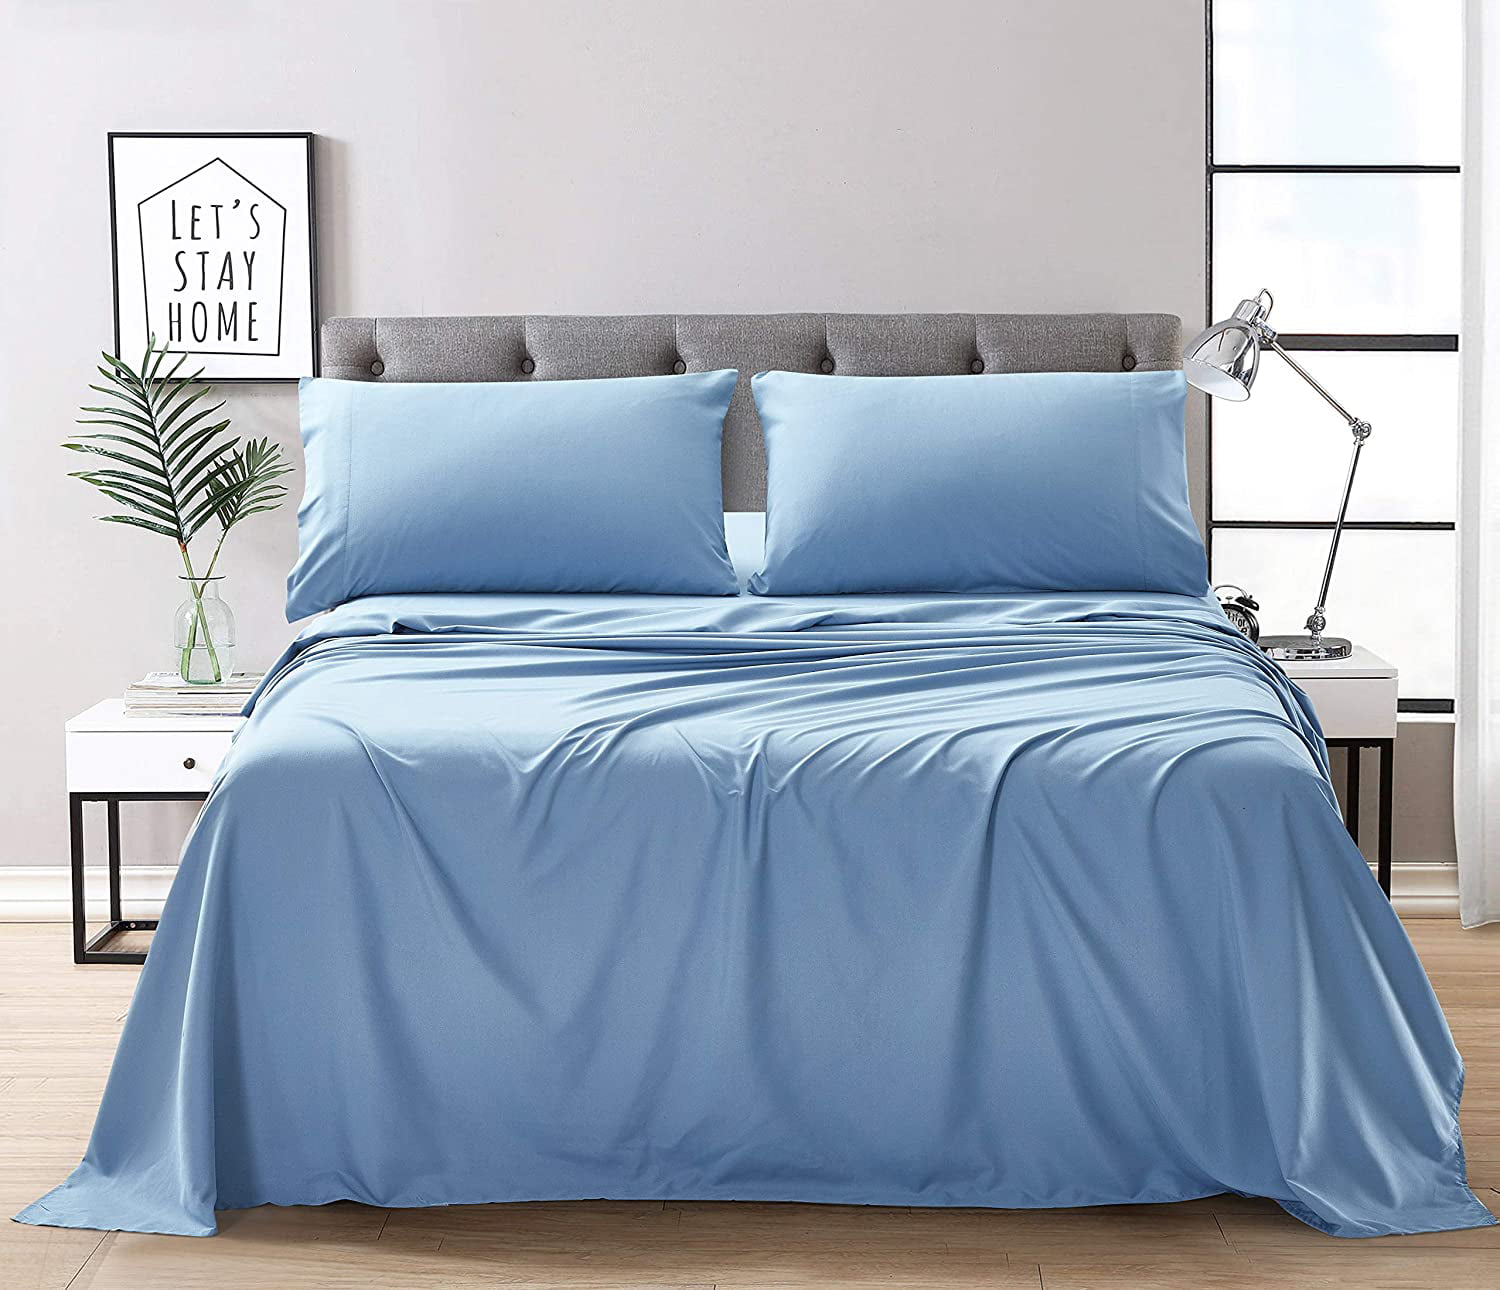 Hypoallergenic Easy Care Breathable Premium Ultra Soft Top/Flat Bed Sheet 